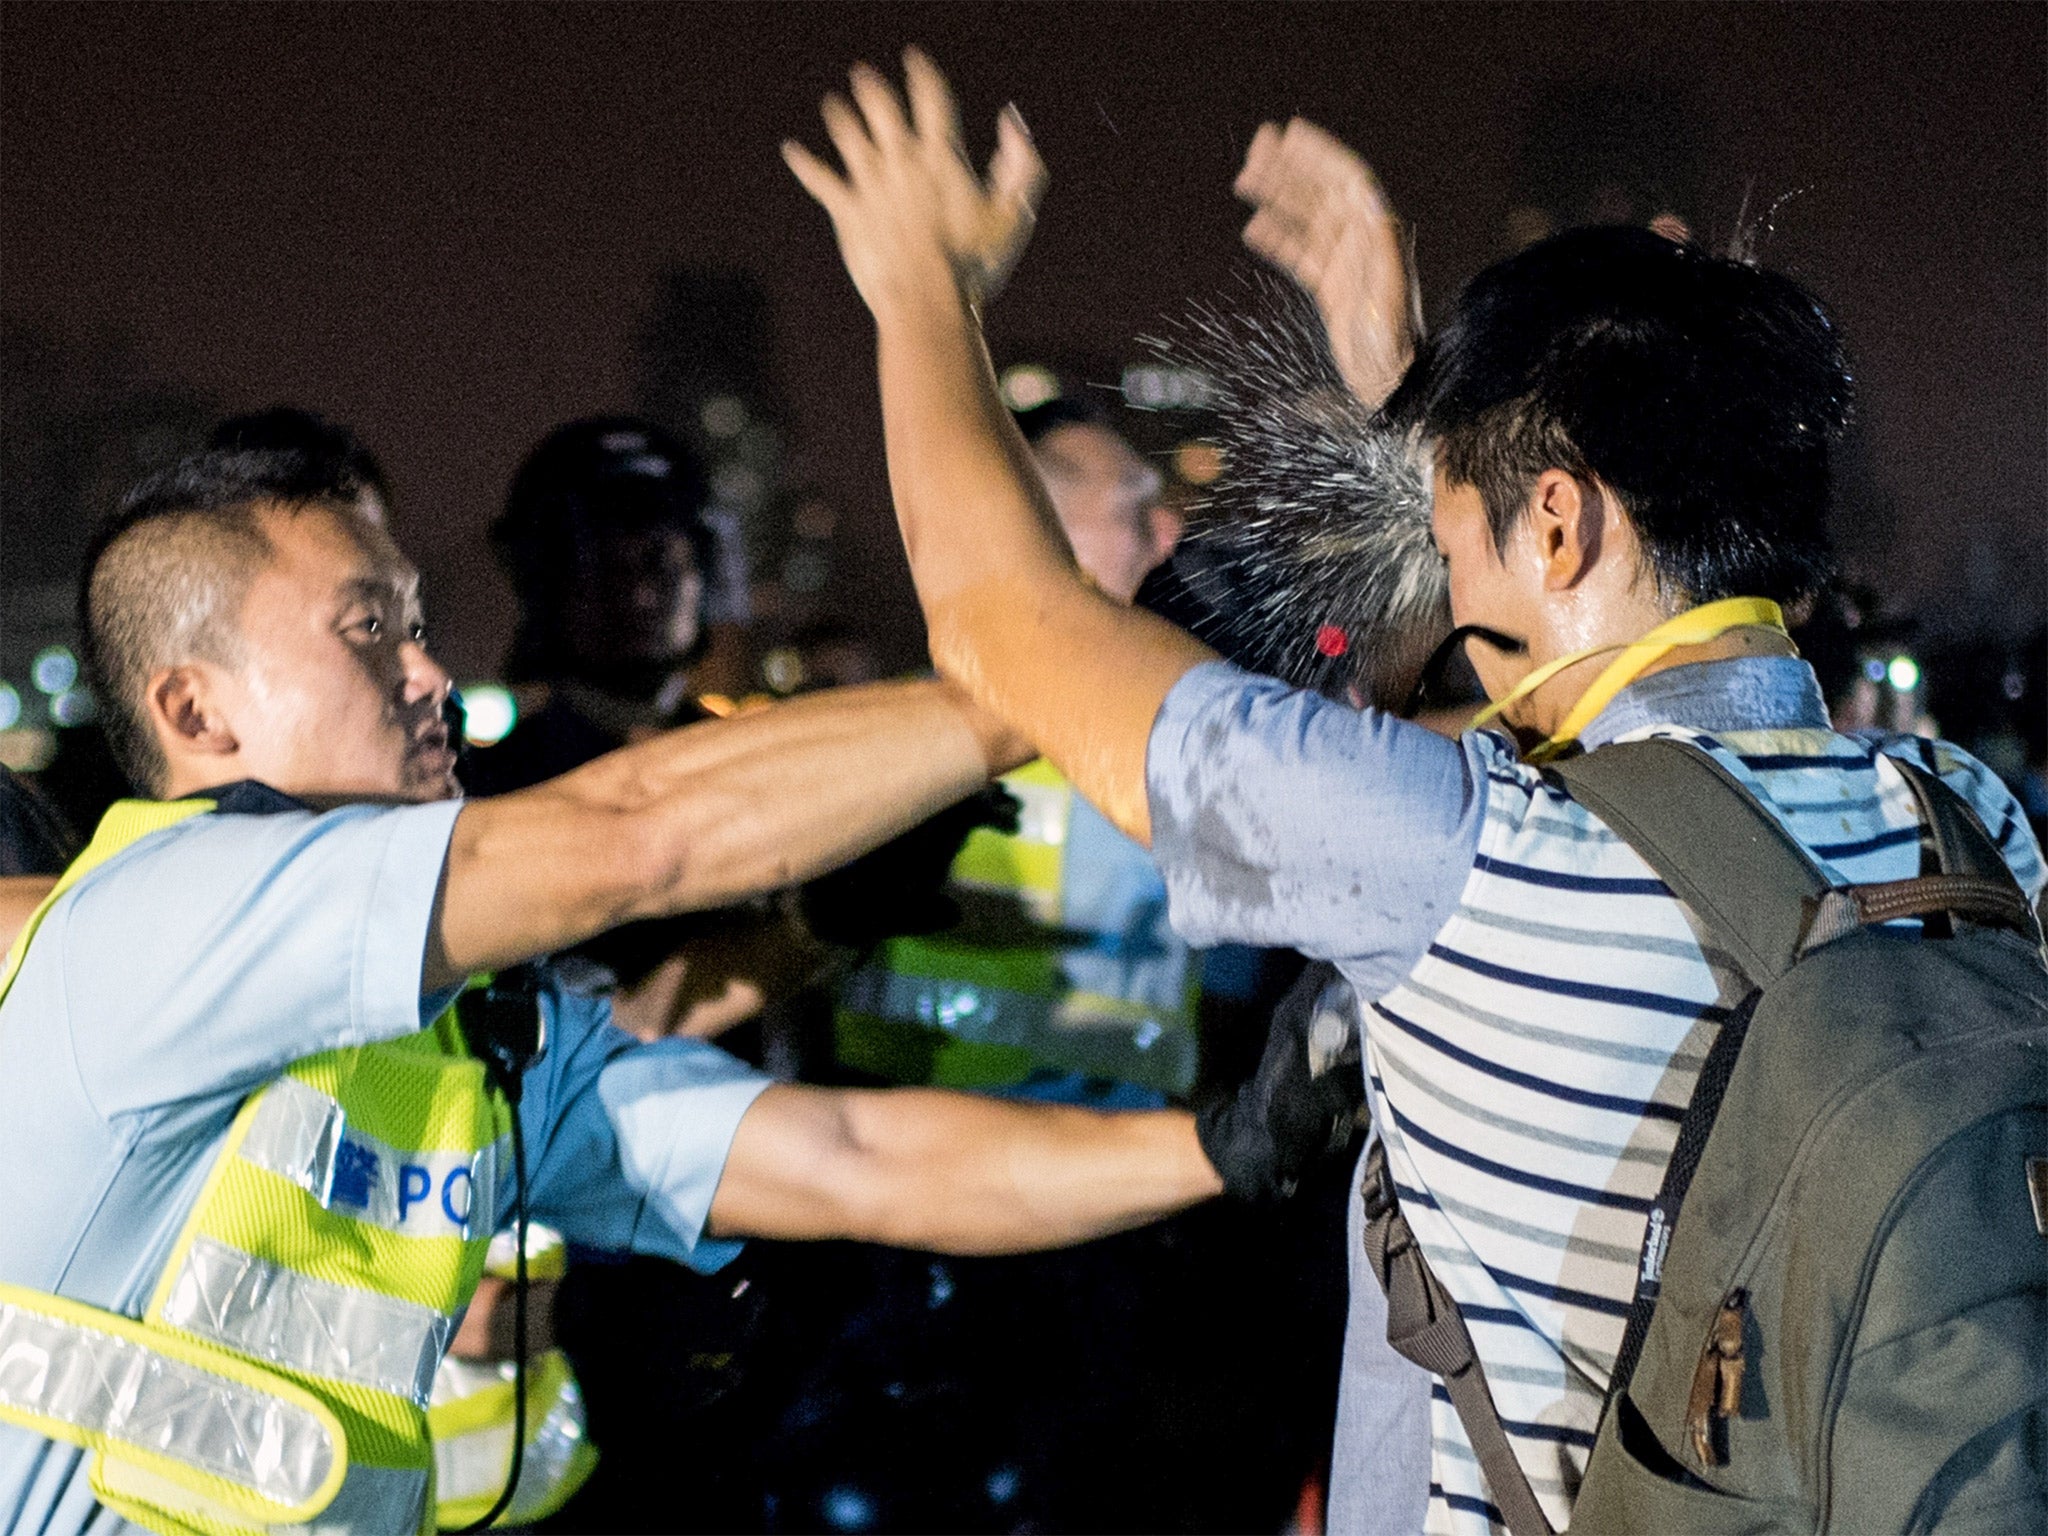 A policeman sprays an activist in the face with pepper spray as the authorities move to clear protesters from the central area